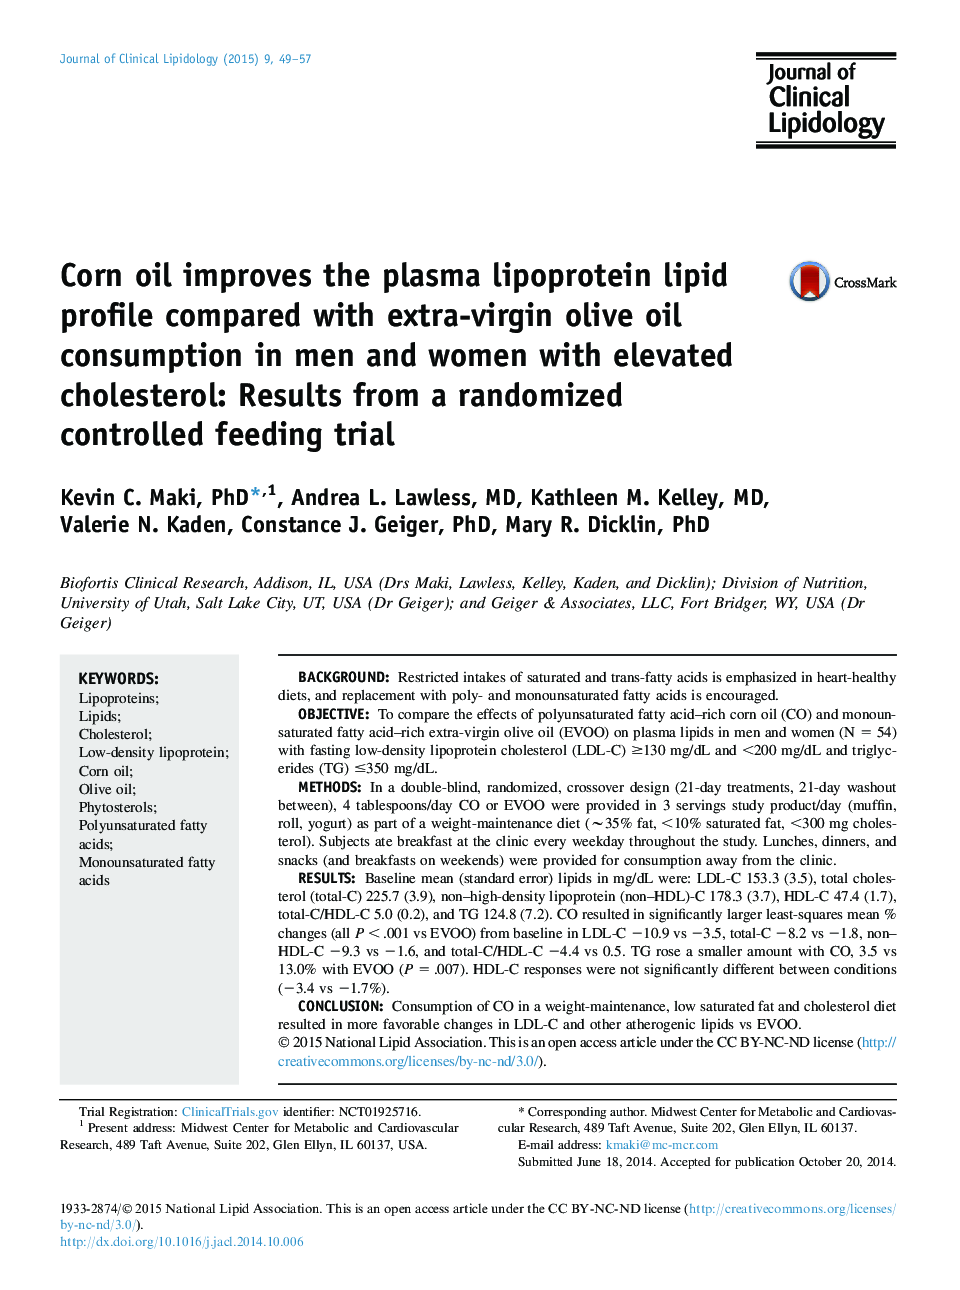 Corn oil improves the plasma lipoprotein lipid profile compared with extra-virgin olive oil consumption in men and women with elevated cholesterol: Results from a randomized controlled feeding trial